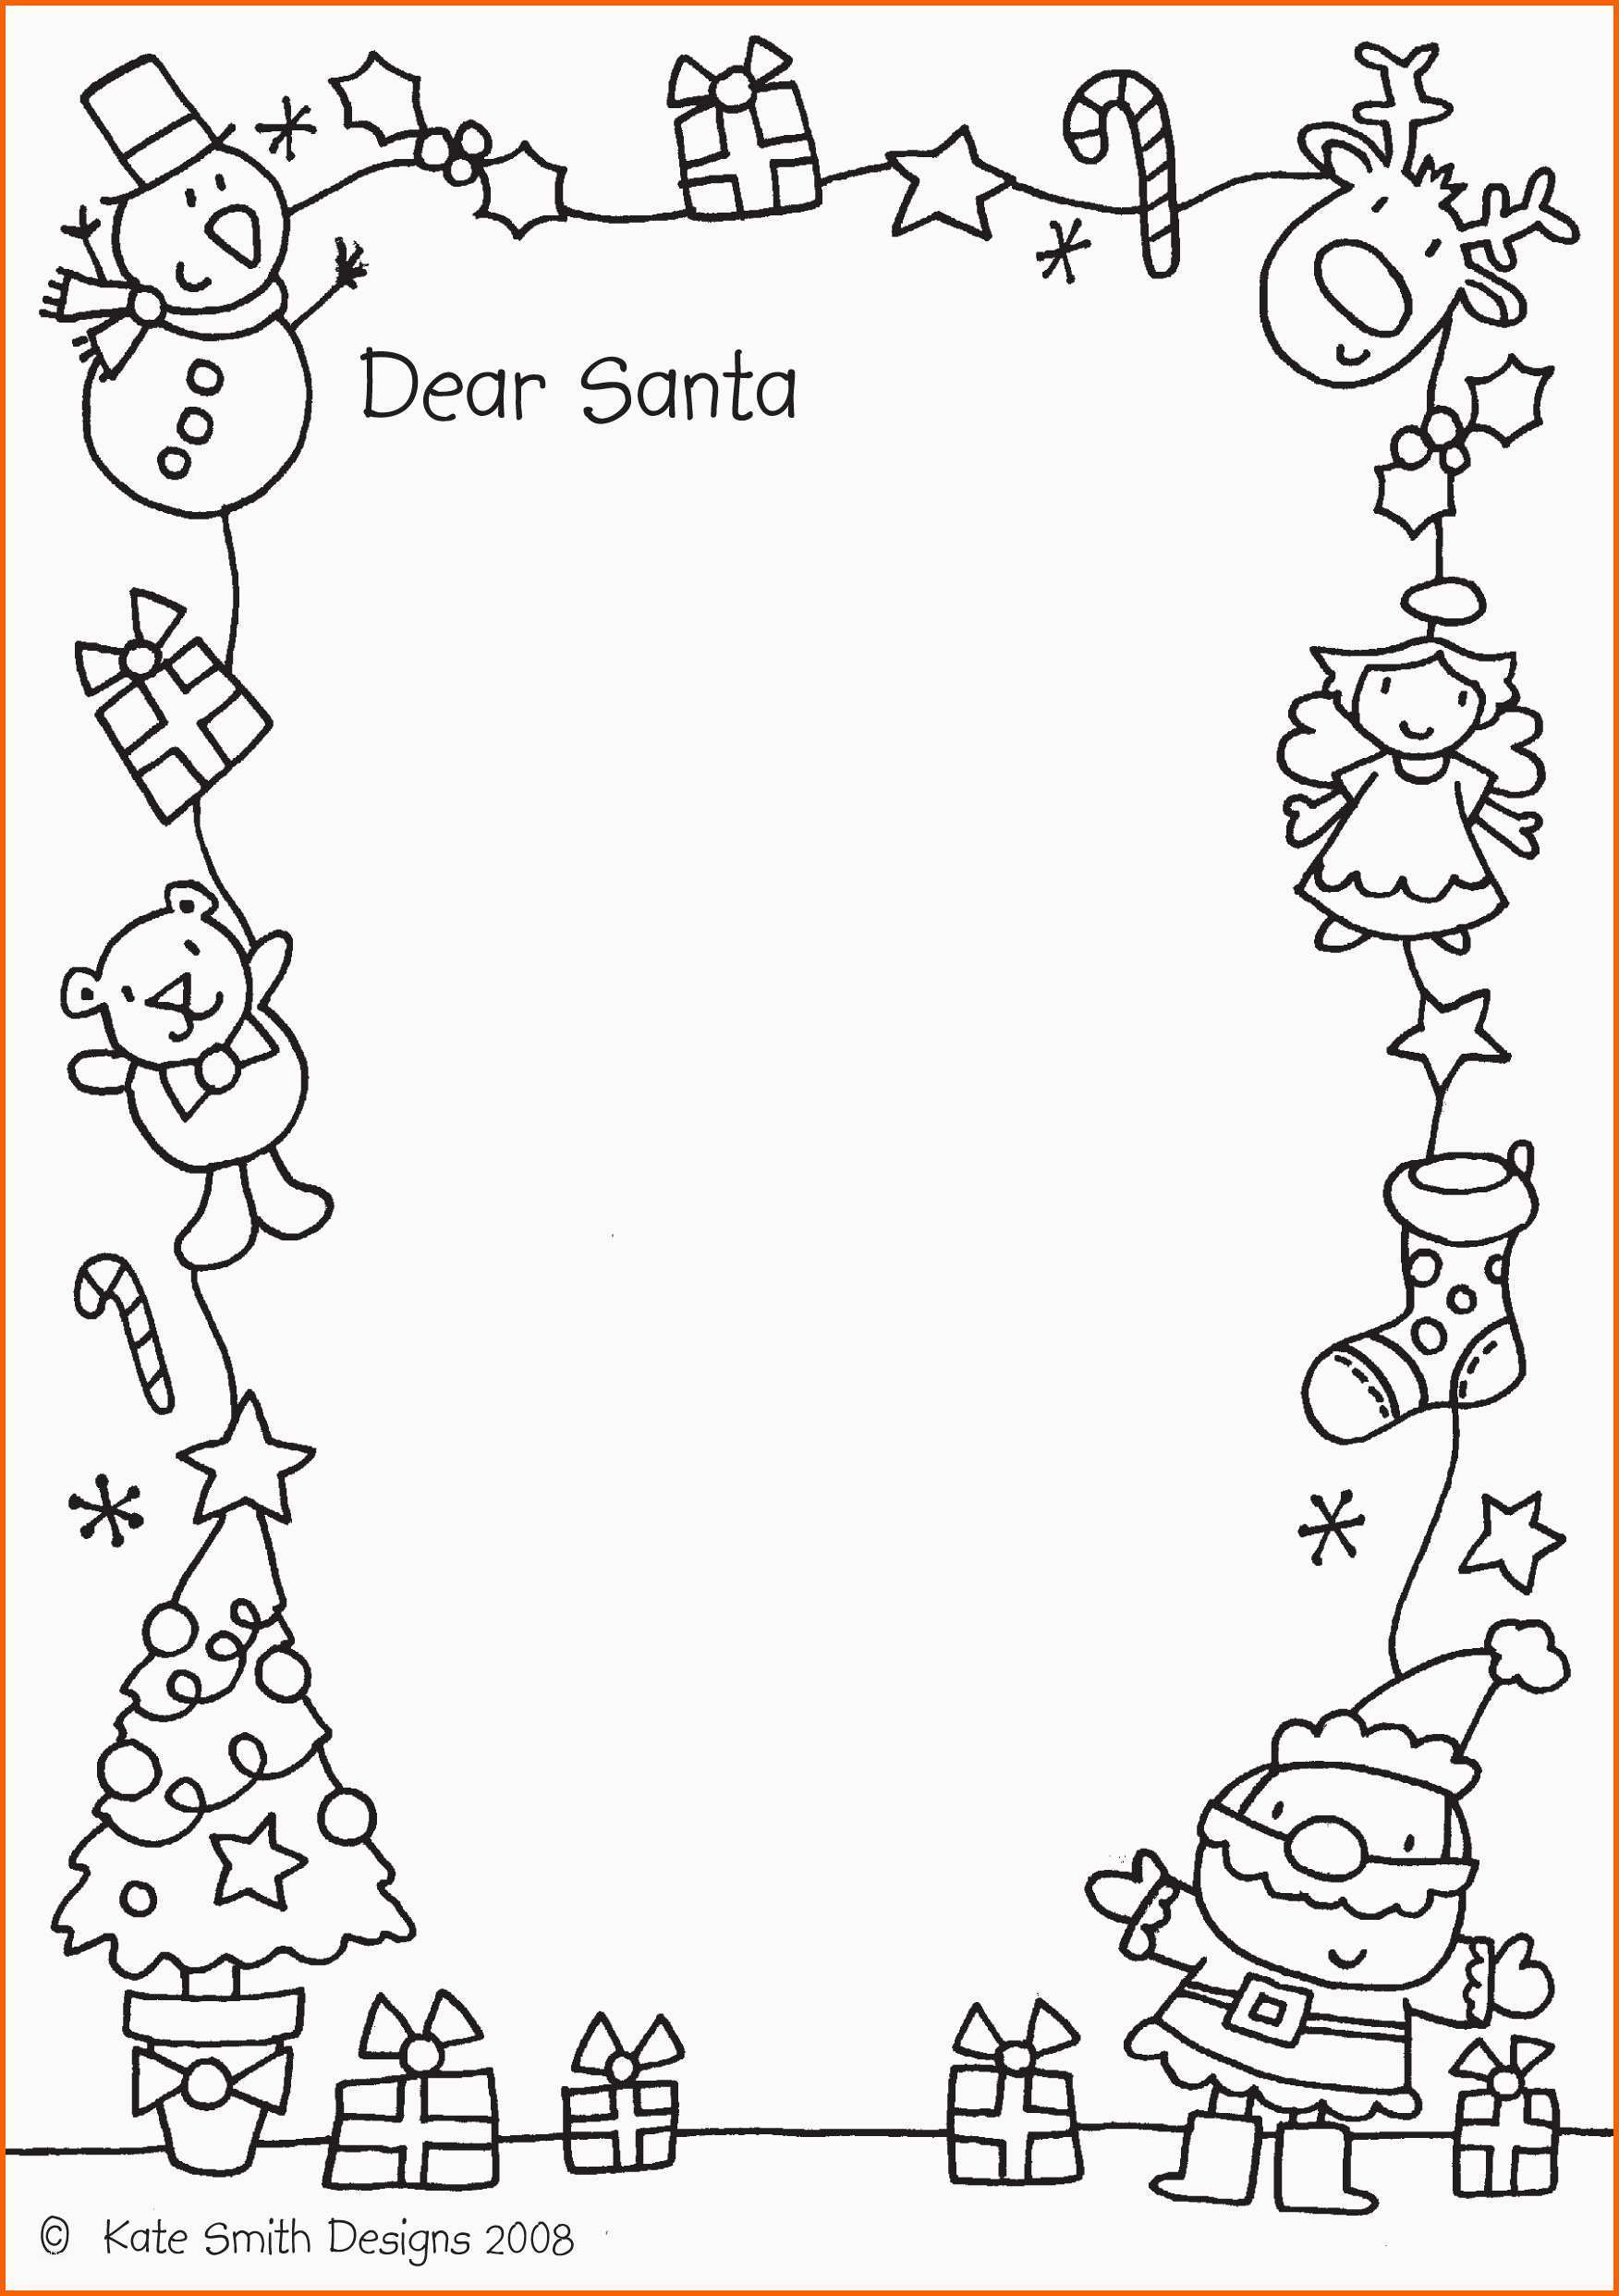 tag=santa letter to colour in